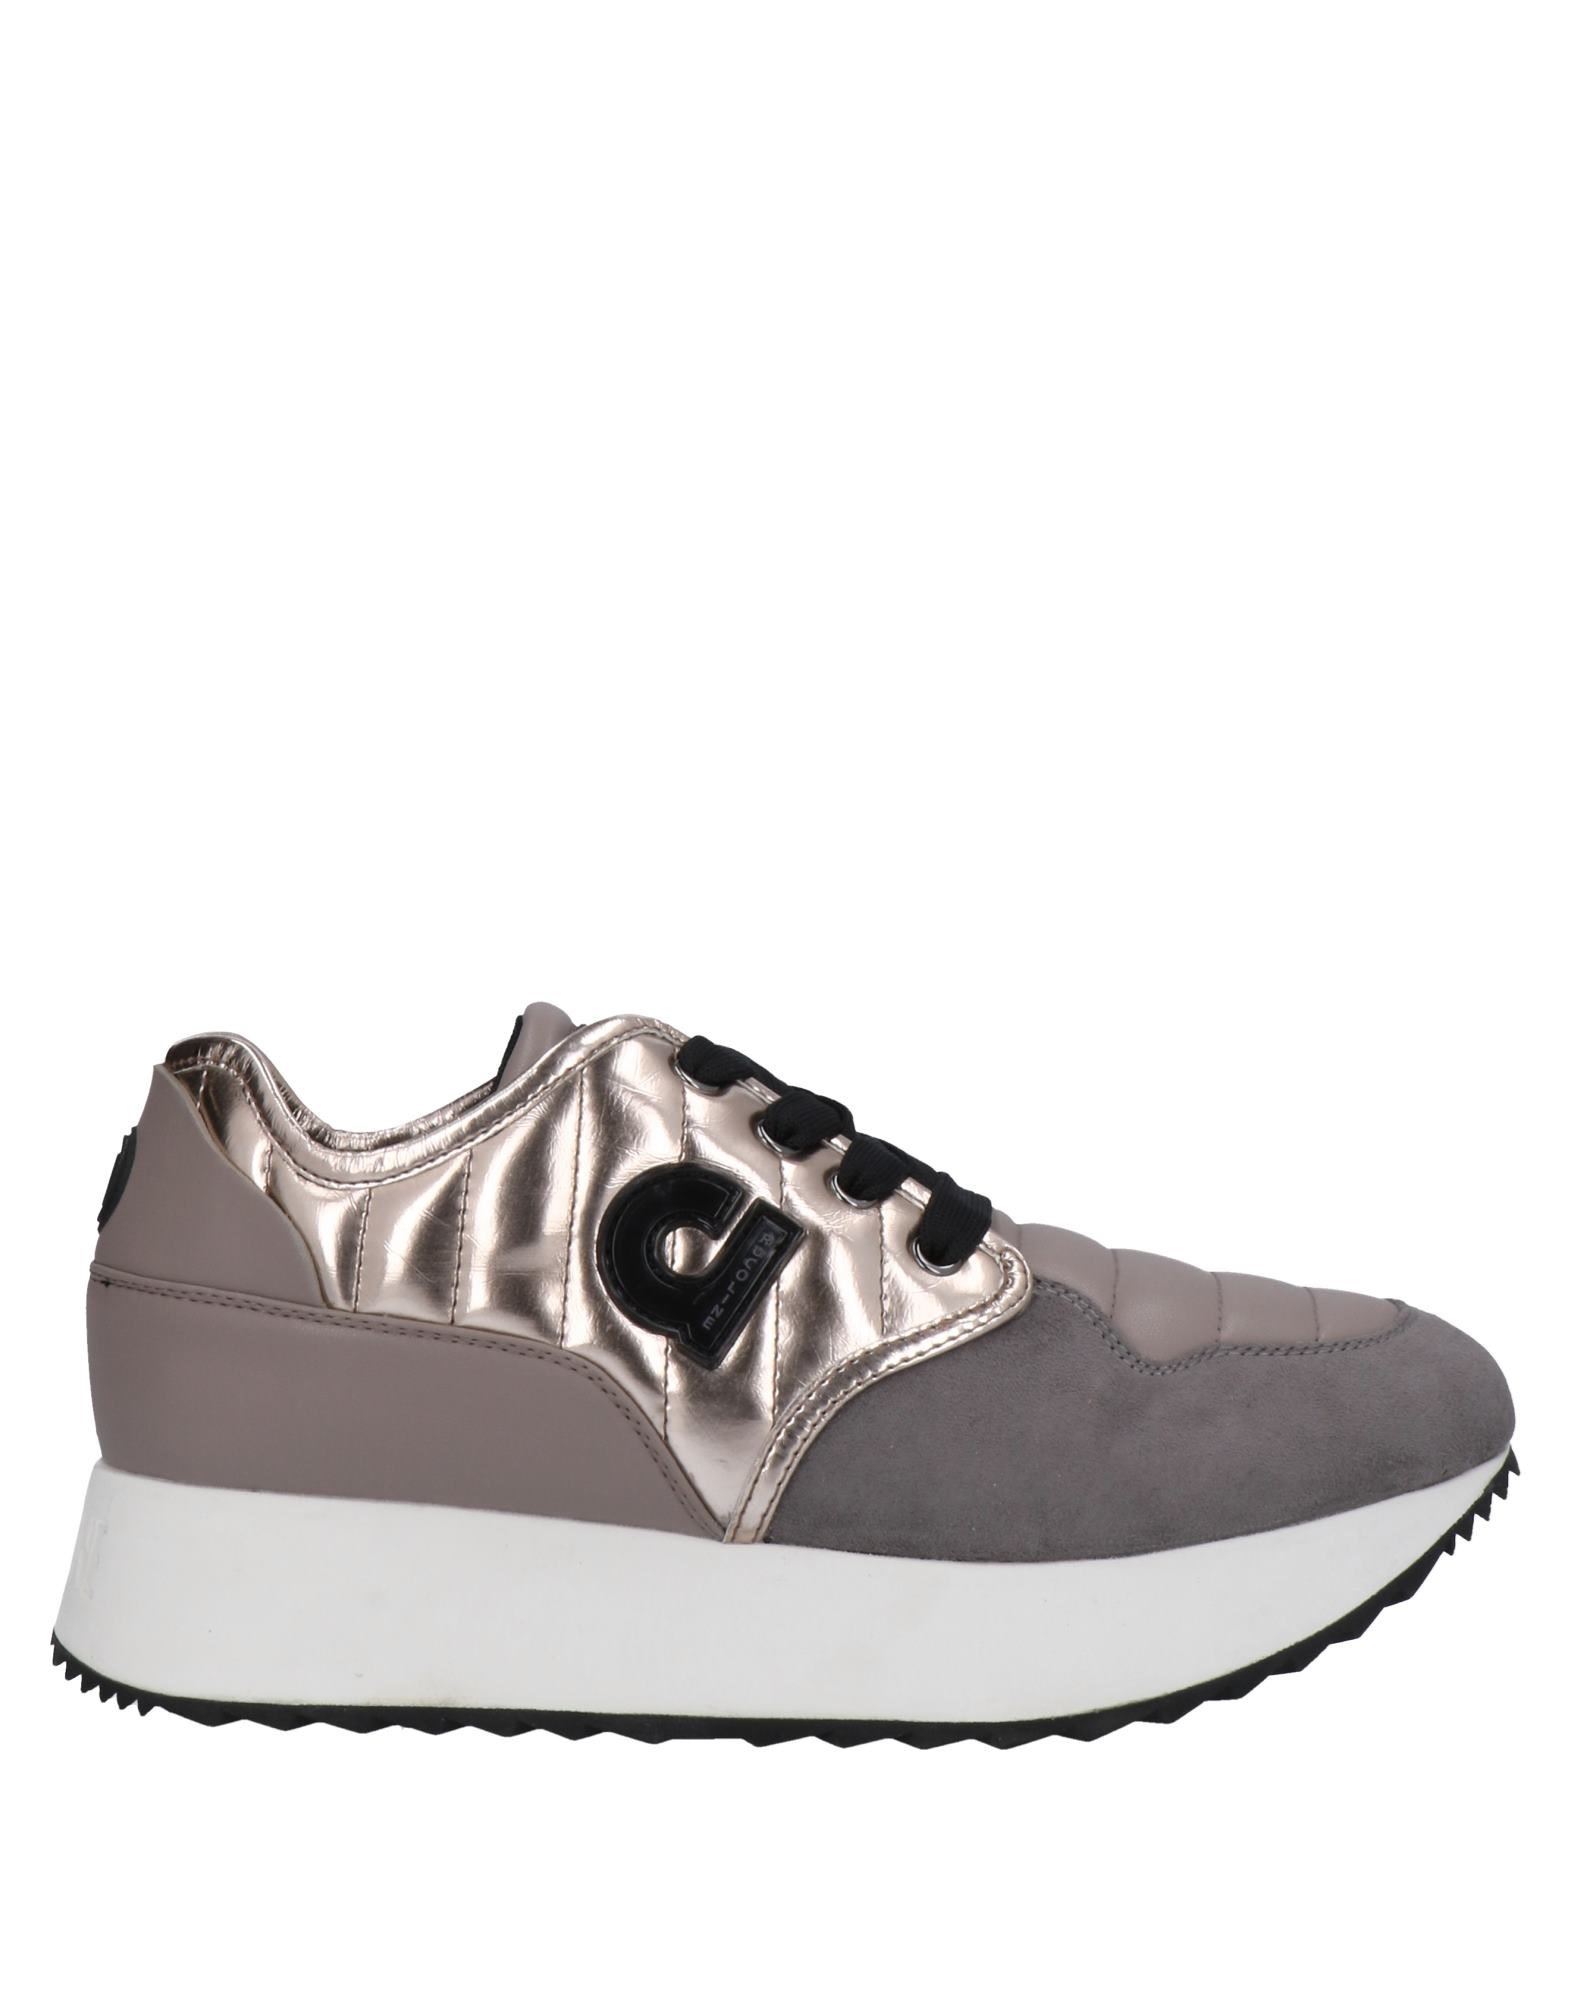 Agile By Rucoline Sneakers In Dove Grey